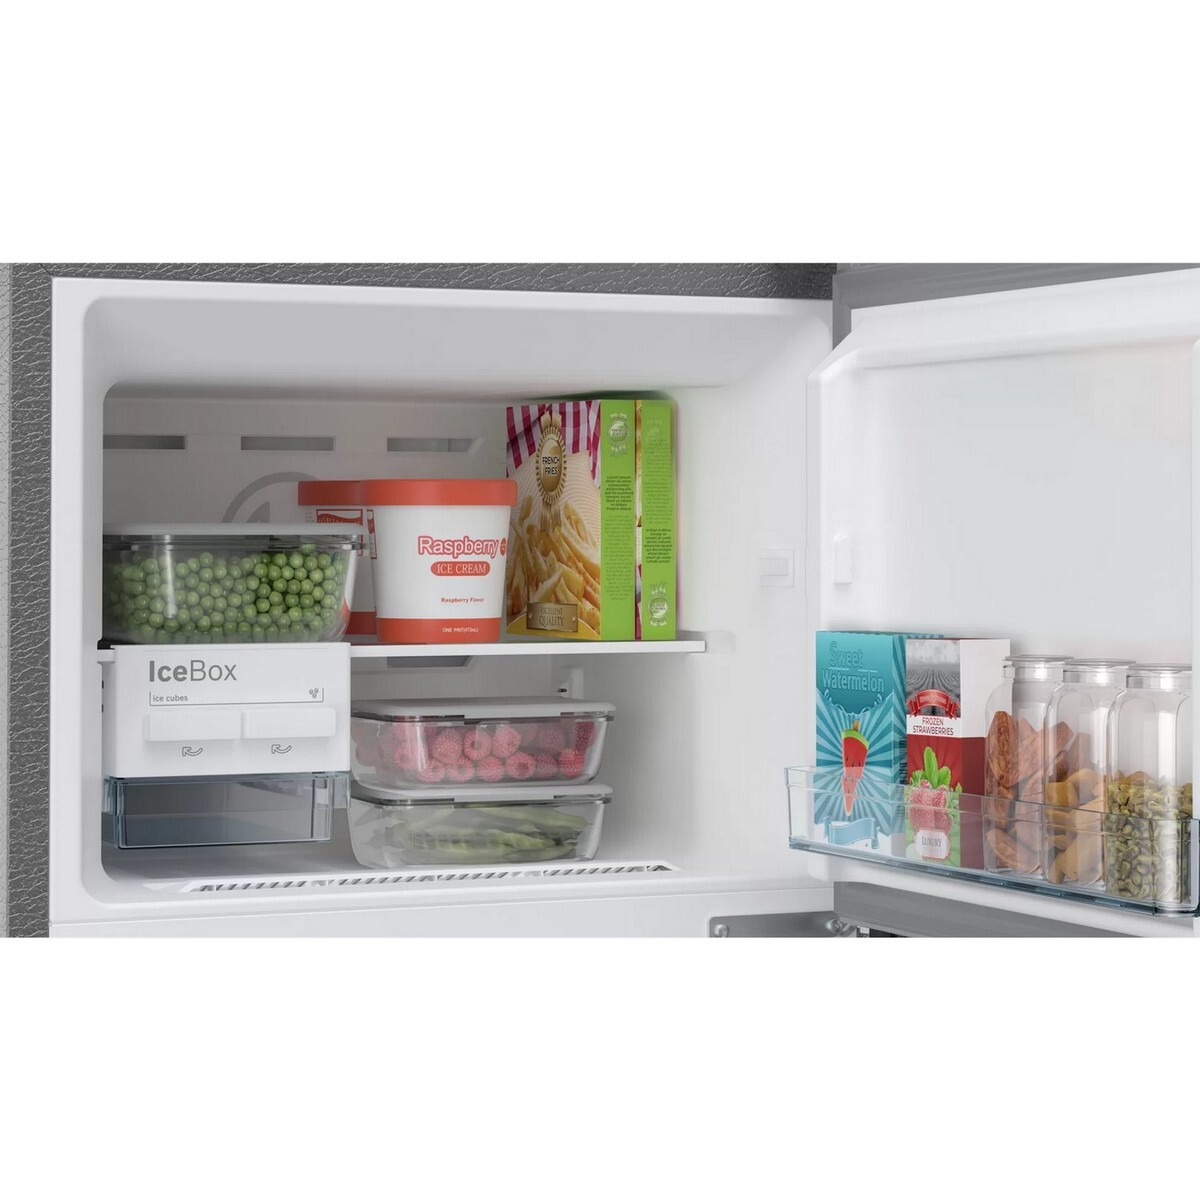 Bosch 4 Star Frost Free Double Door Refrigerator CTC29S041I 269L Shiny Silver